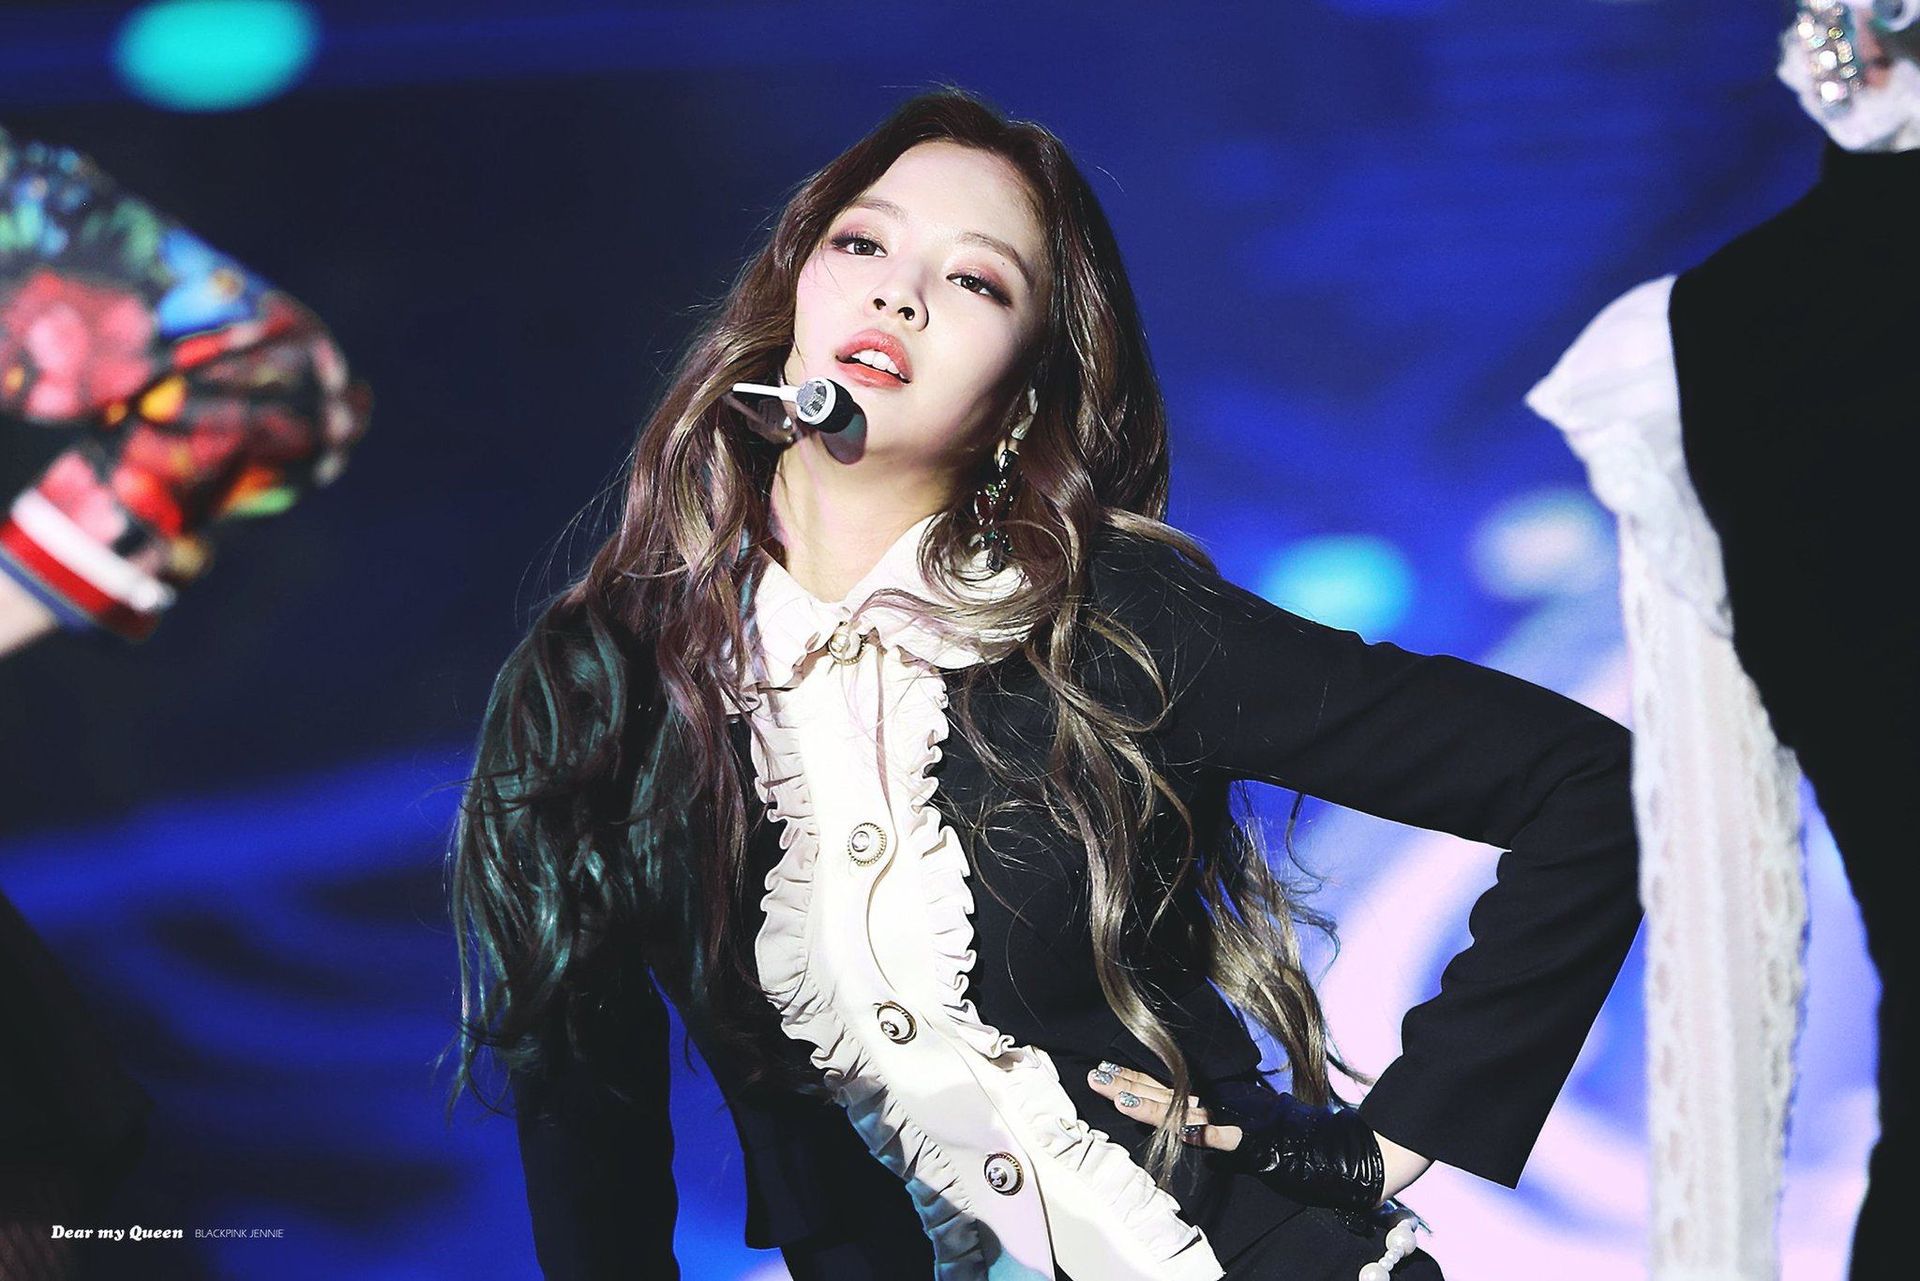 7 Photos of Jennie’s Classy and Sexy Stage Outfit - Koreaboo